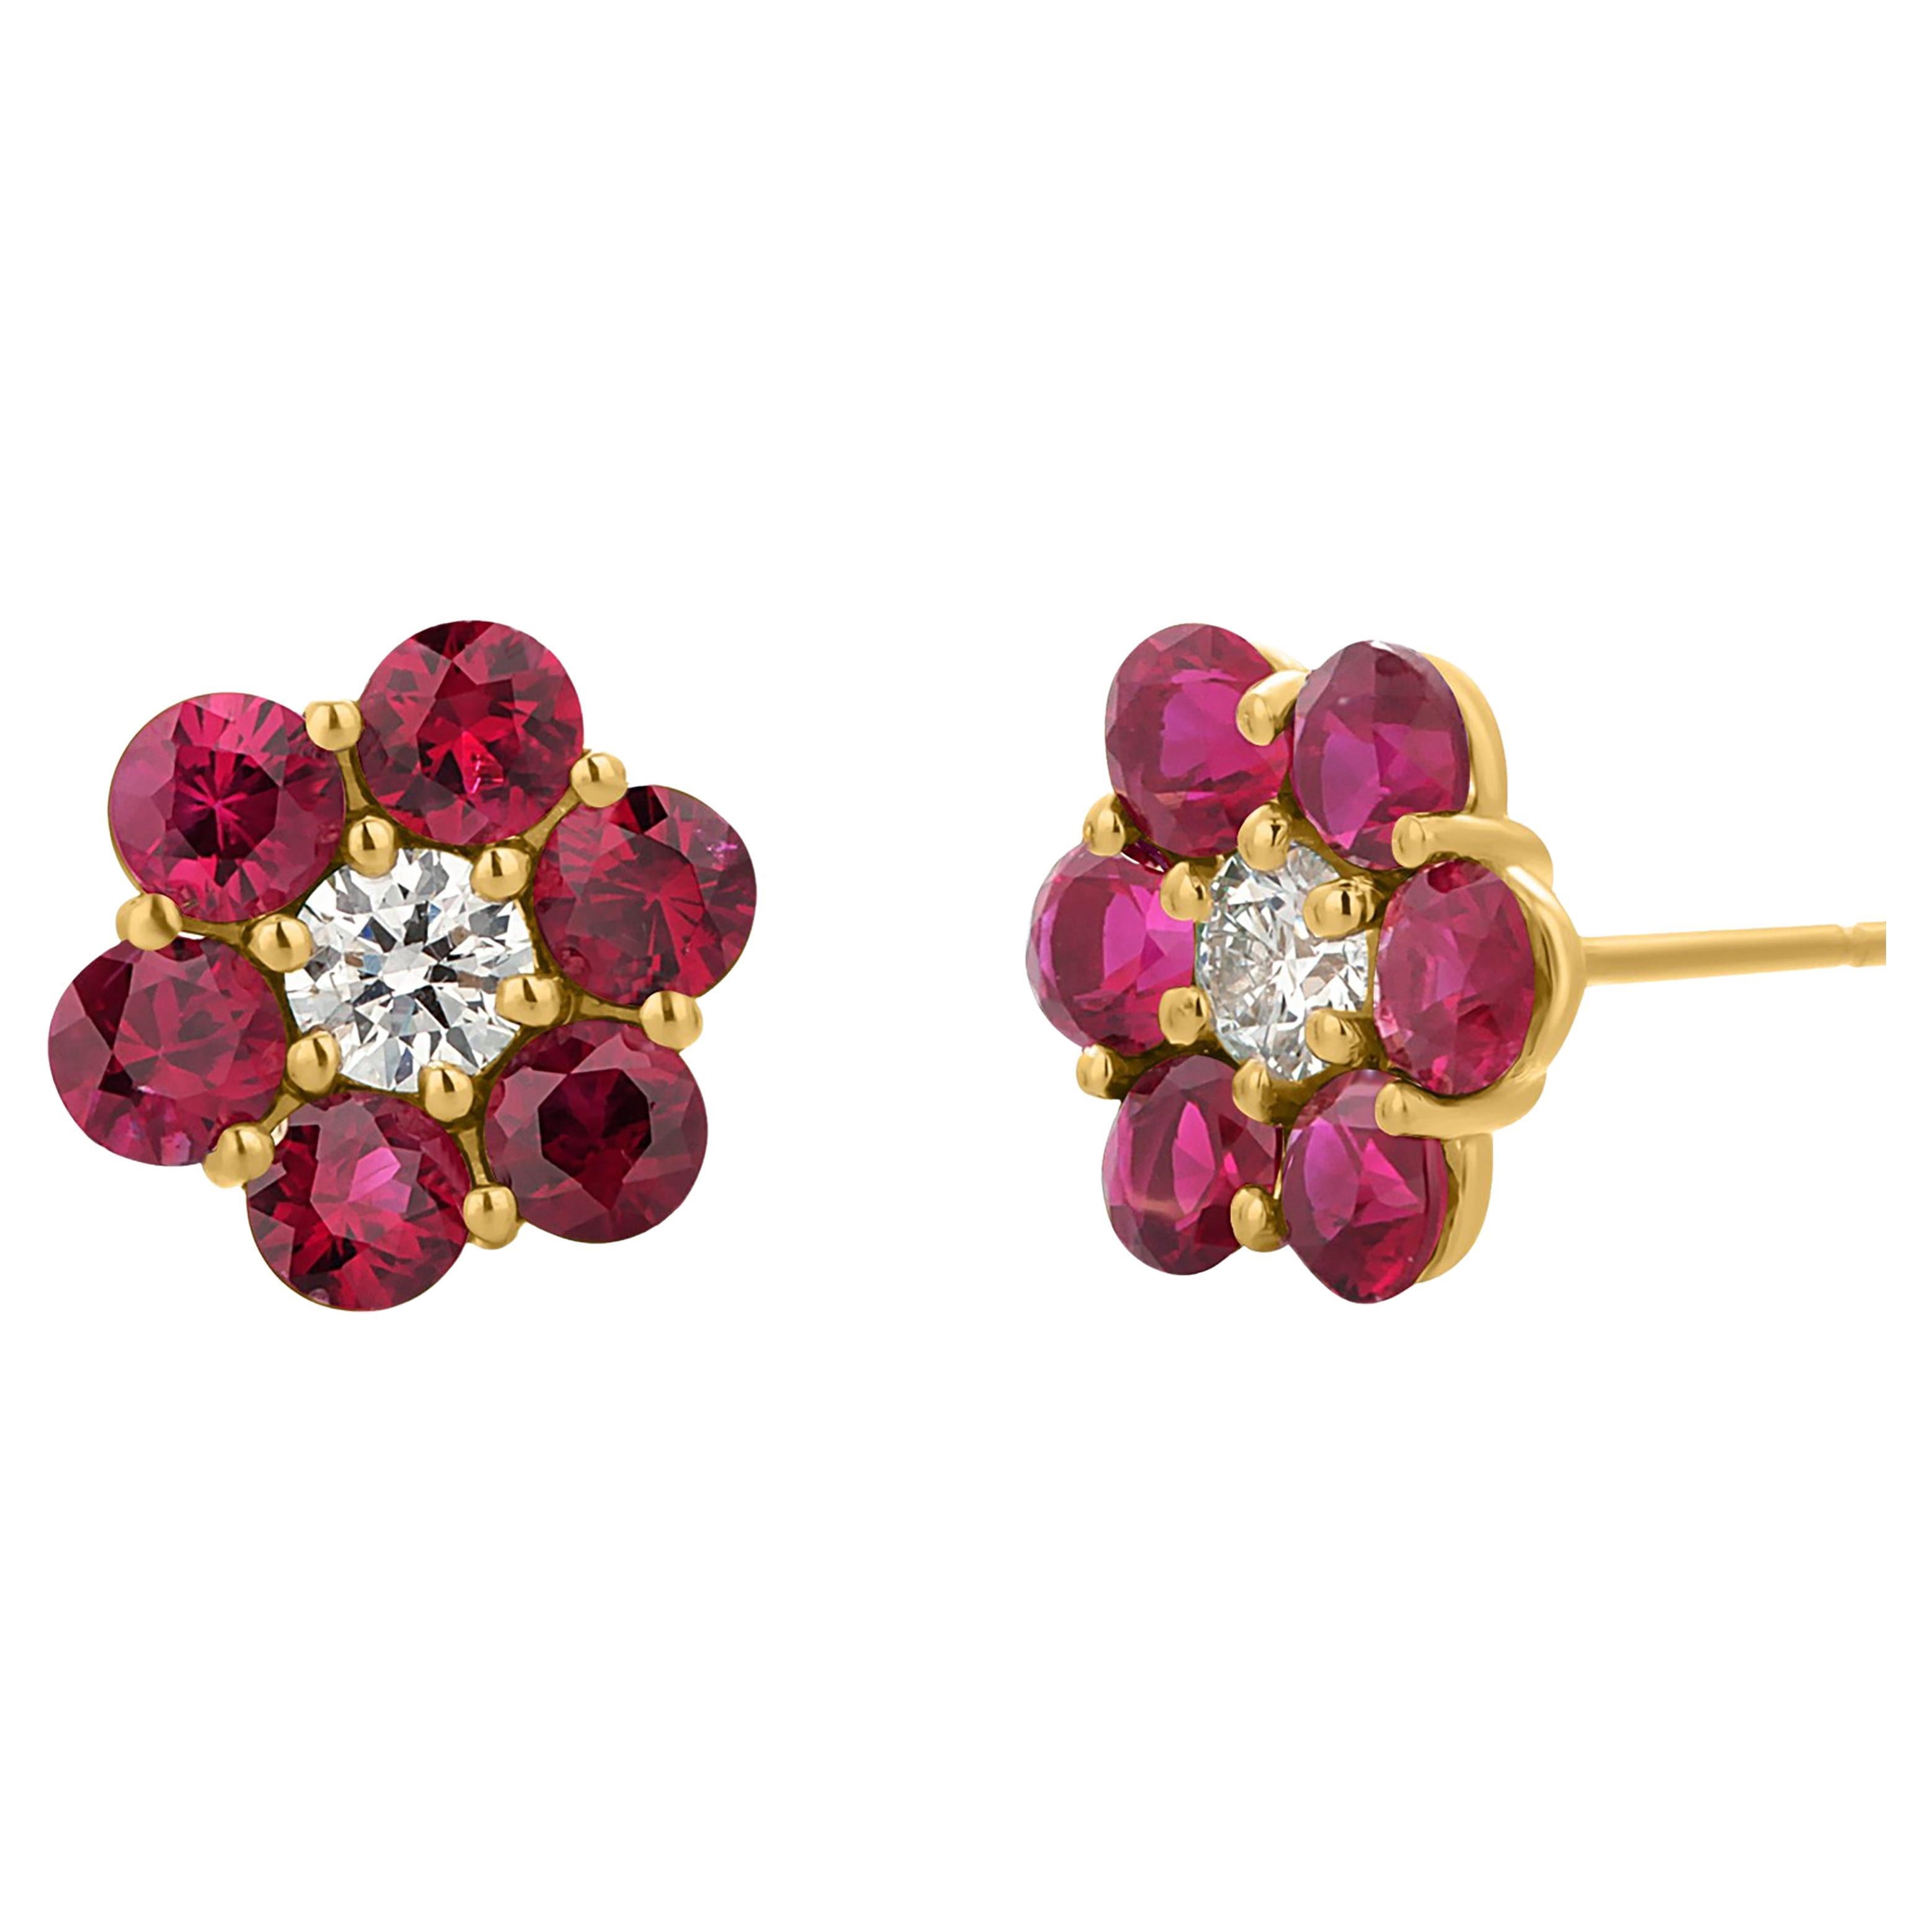 Yellow Gold Floral 0.40 Inch Earrings Adorned with Finest Gemstones 2.70 Carats